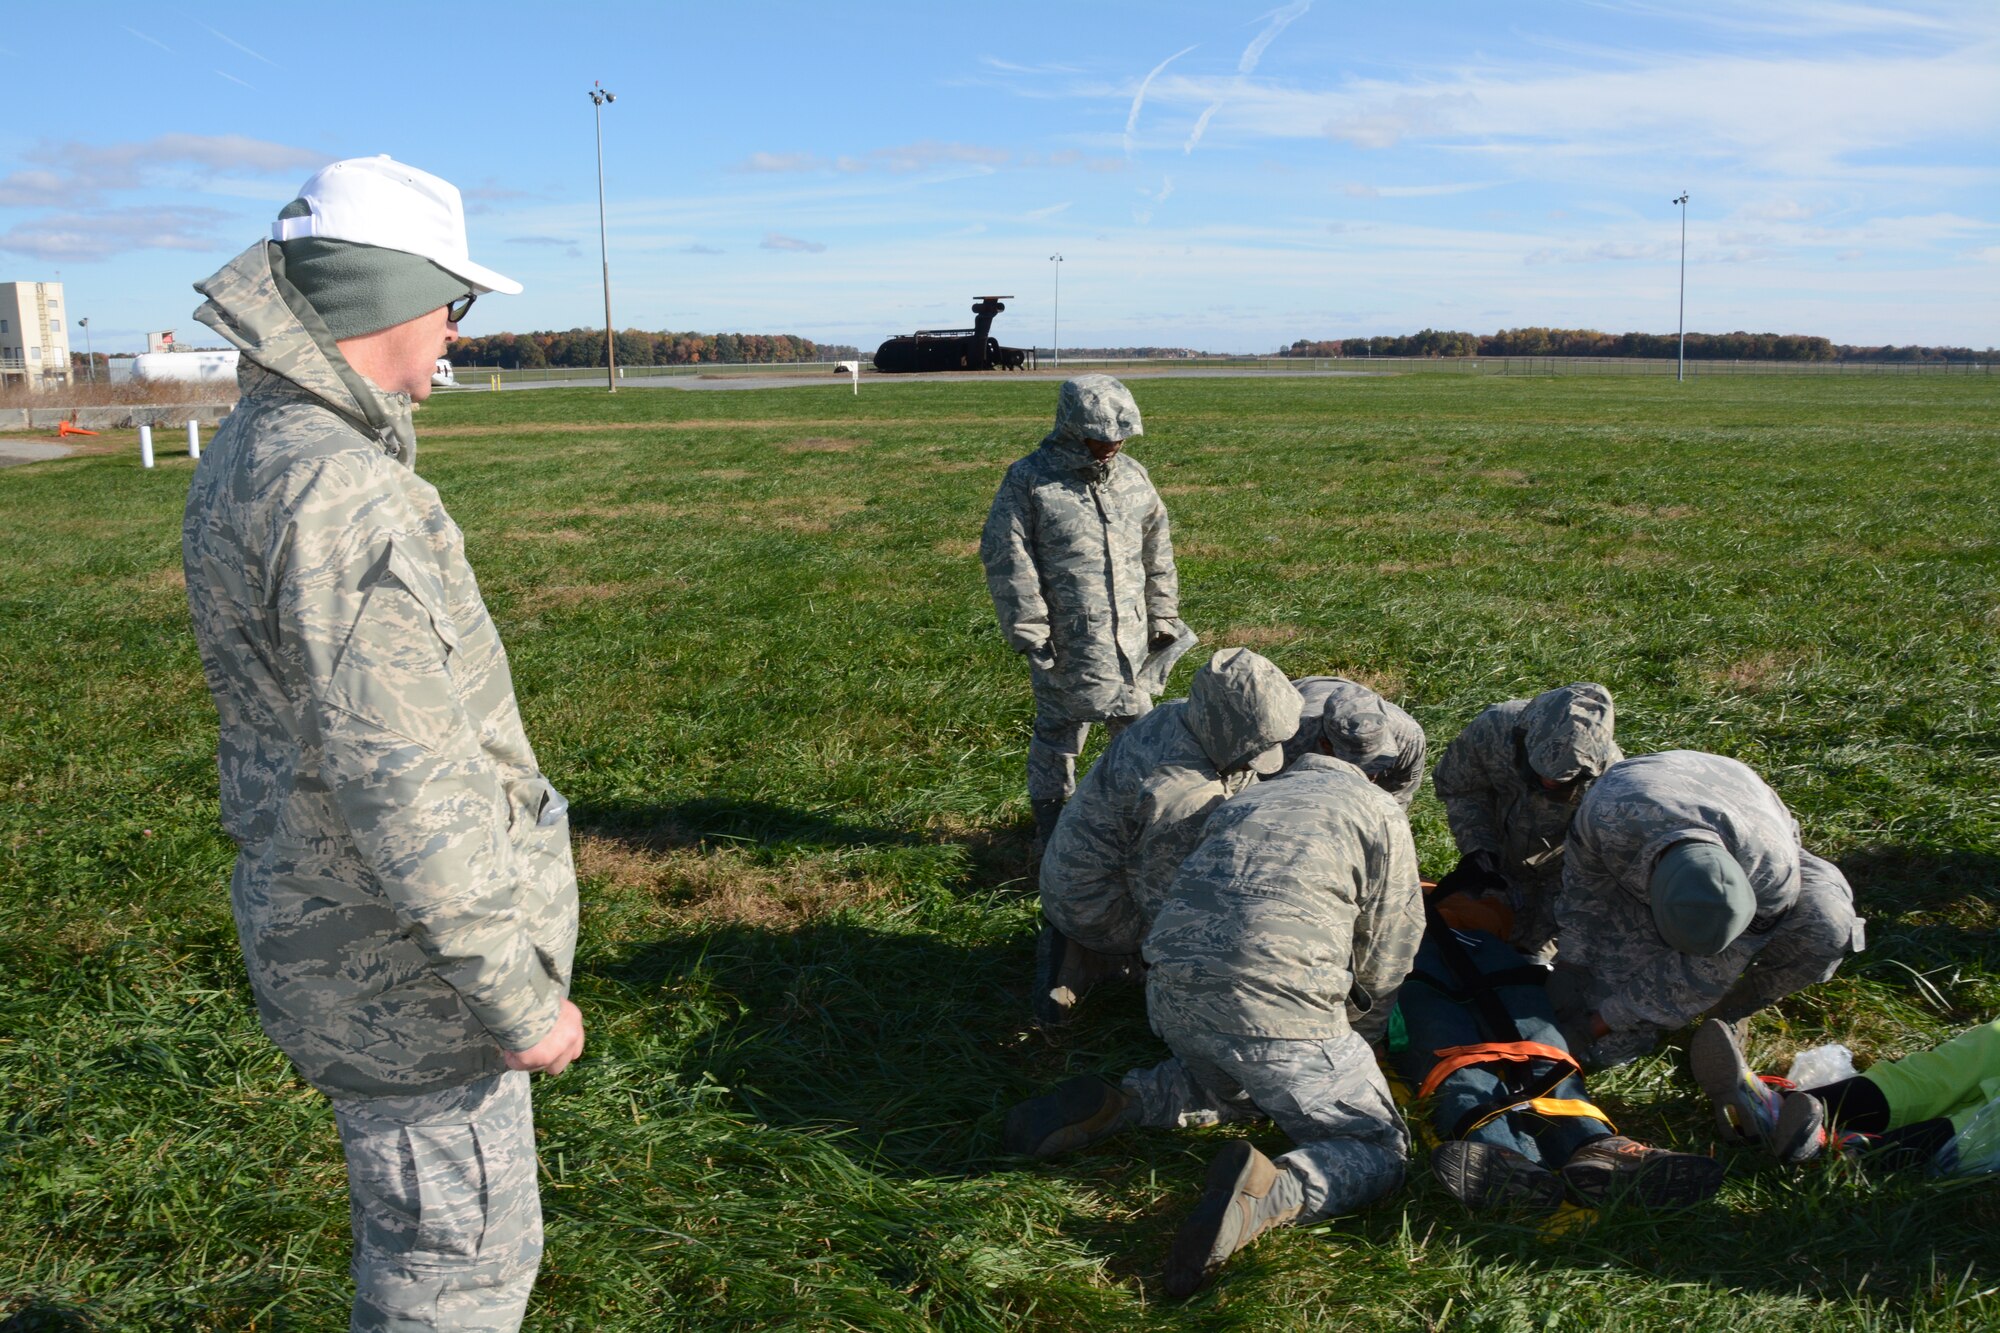 Master Sgt. Robert Burns, 512th Aerospace Medicine Squadron exercise evaluation team leader, observes other medical reservists as they simulate first response assessments of a Delaware Civil Air Patro cadet Nov. 2, 2014, at Dover Air Force Base, Del. The training served to prepare participants for real world mass casualty emergencies. (U.S. Air Force photo/Senior Airman Joe Yanik)  